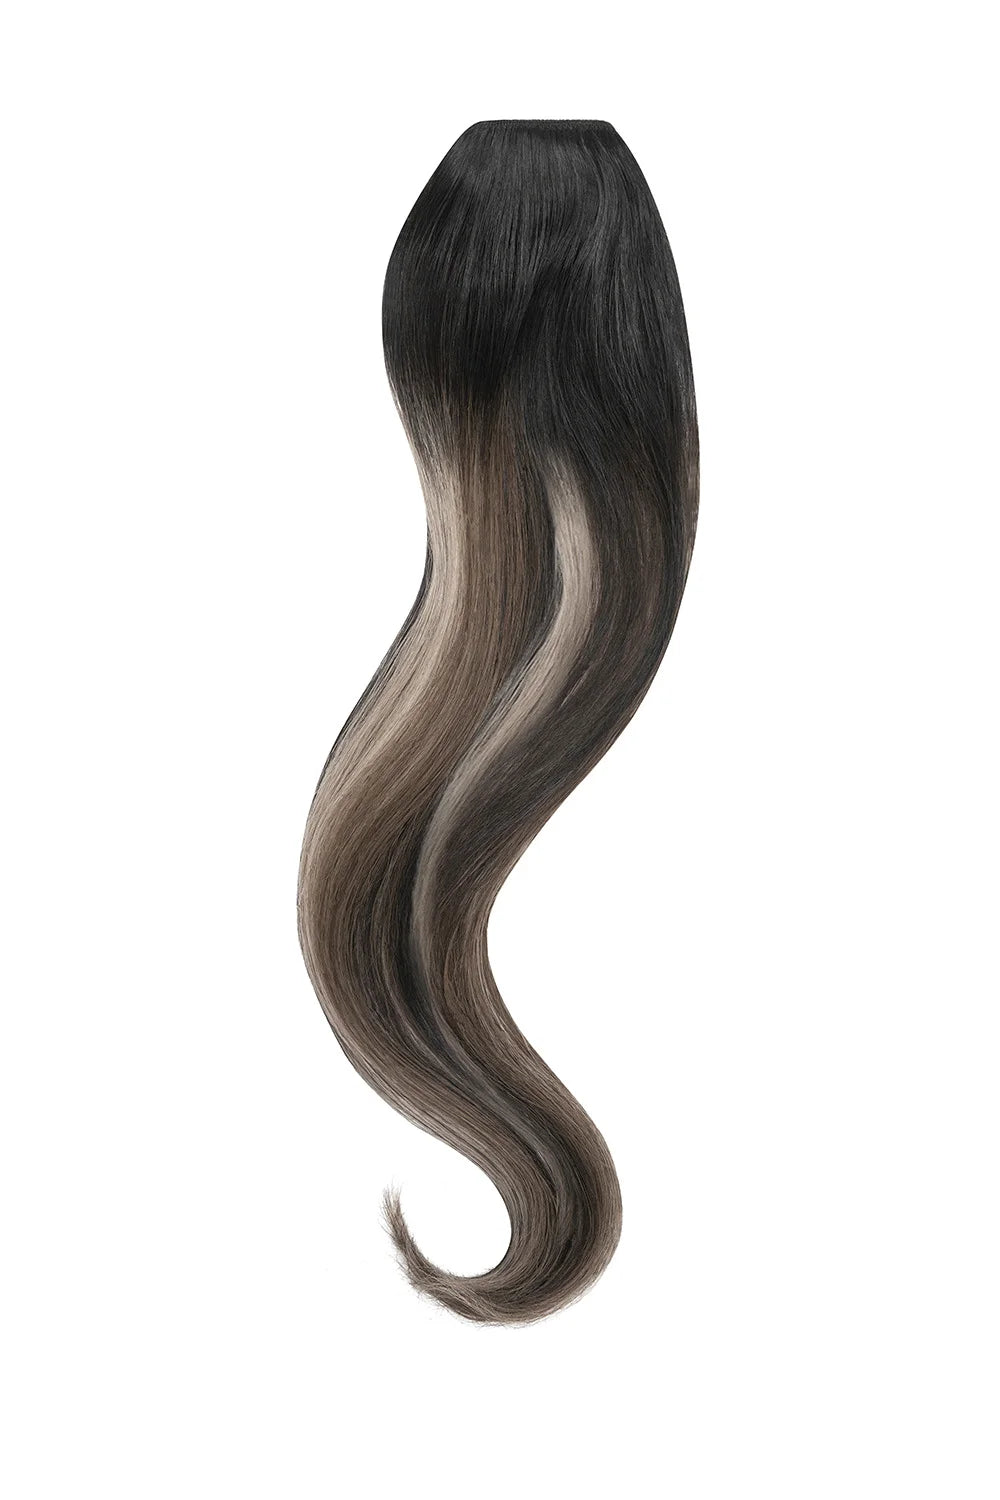 Silver shadow balayage one piece top-up hair extension